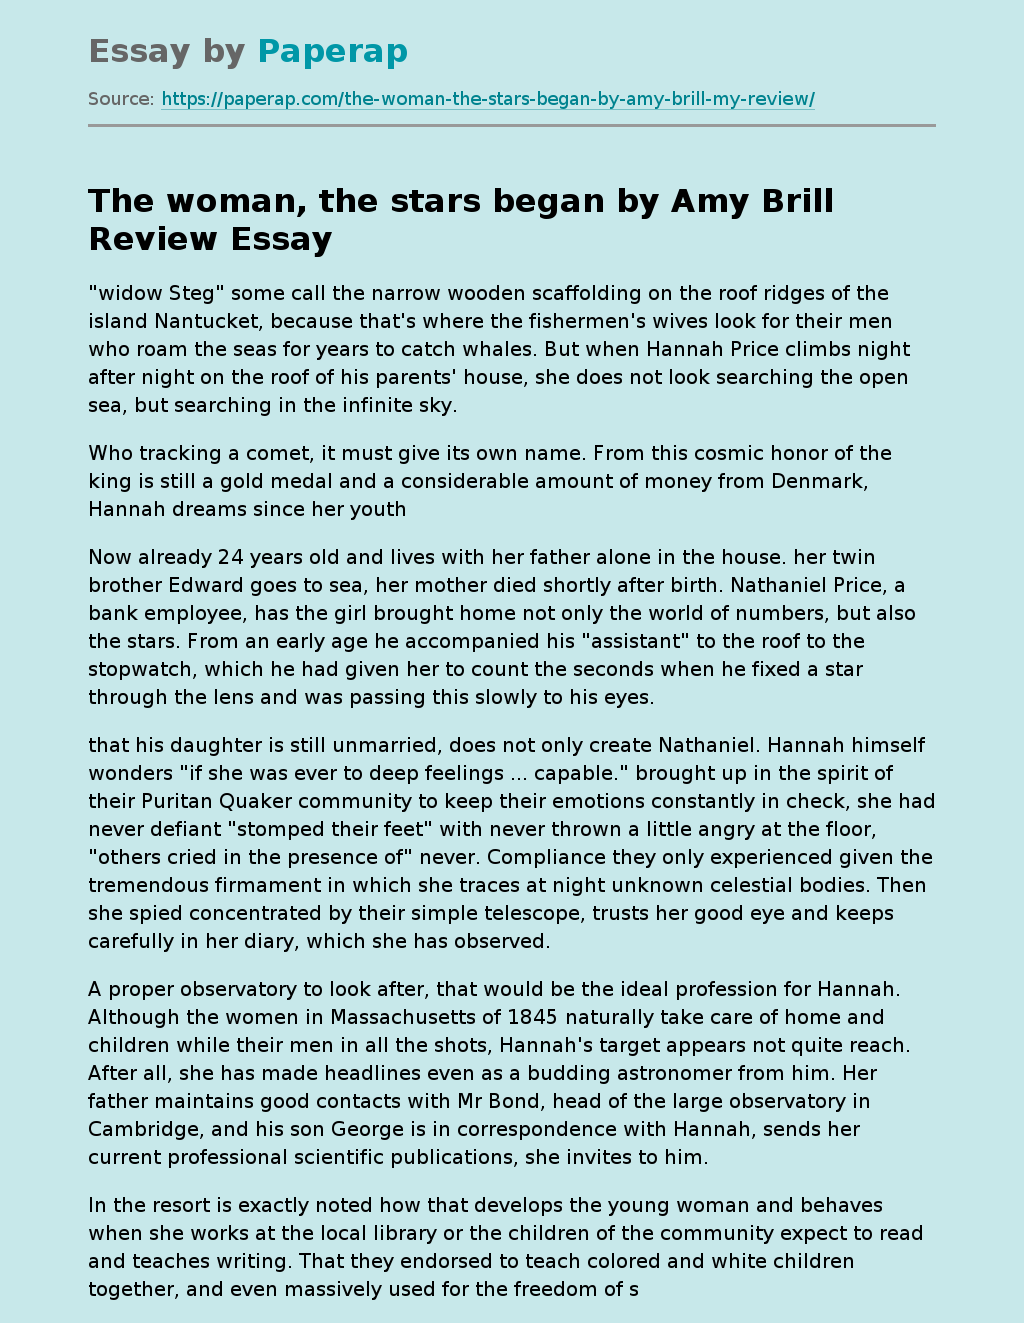 “The Woman, the Stars Began” by Amy Brill